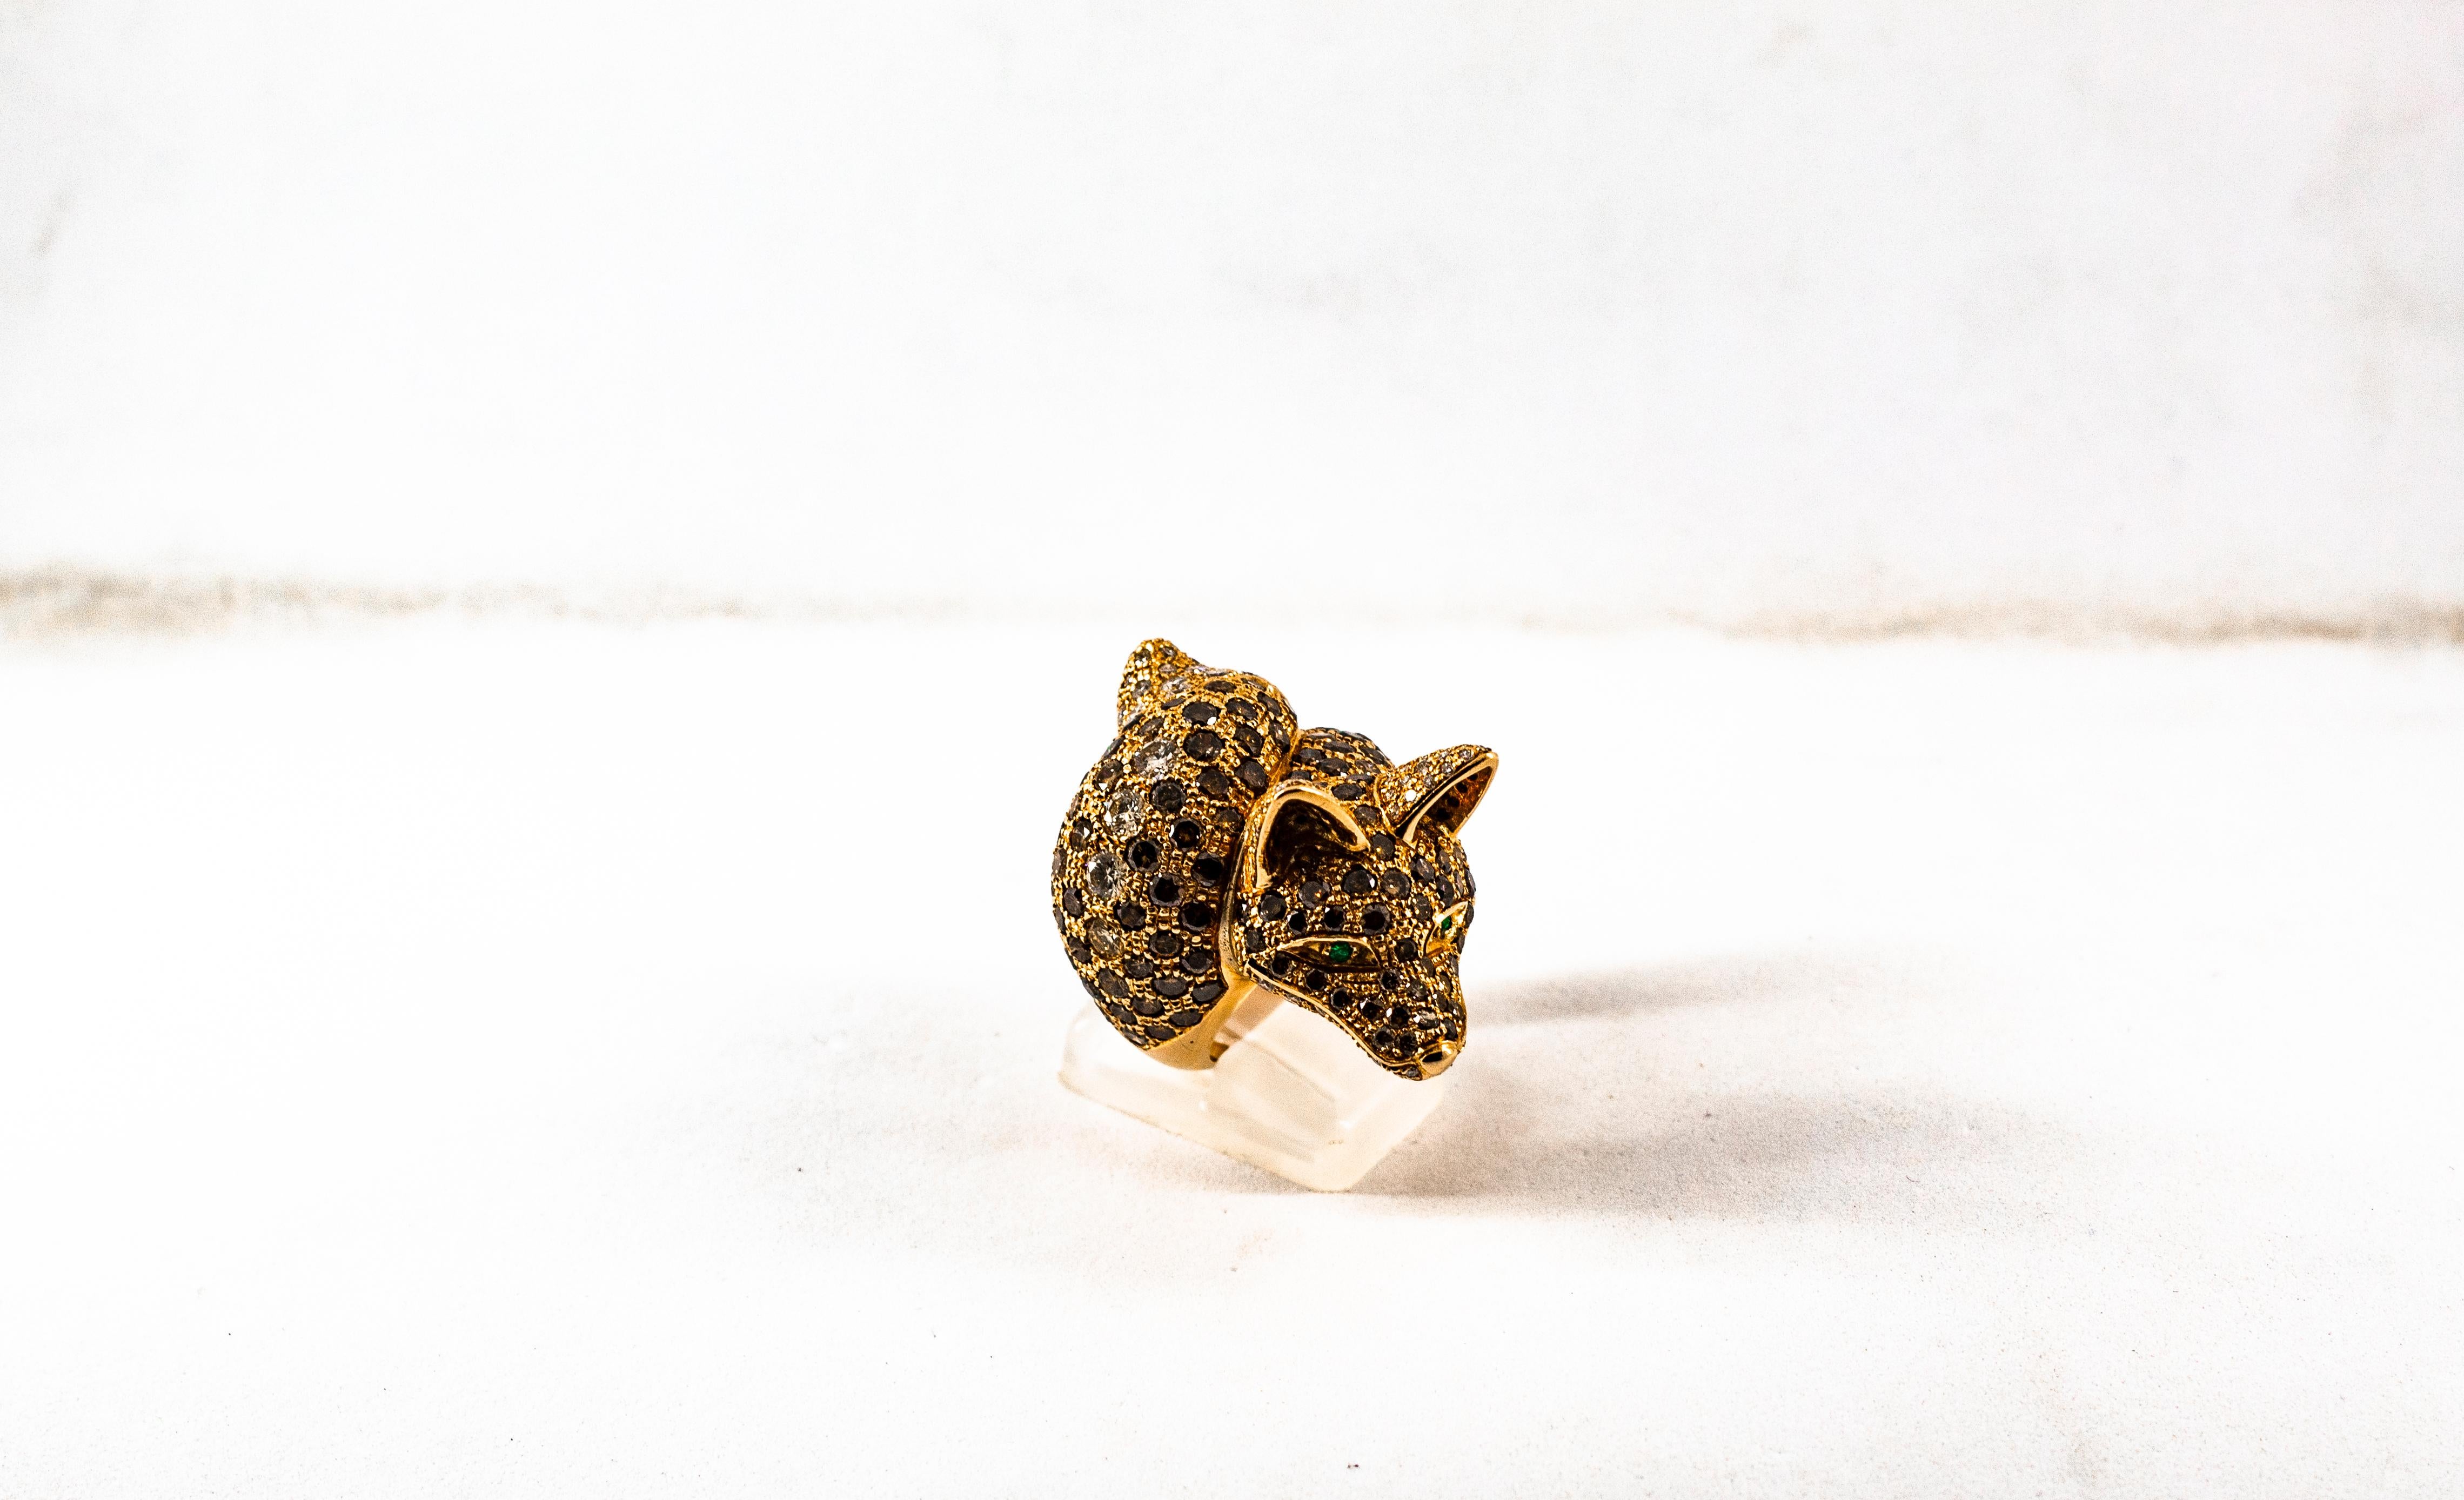 This Ring is made of 14K Yellow Gold.
This Ring has 1.60 Carats of White Modern Round Cut Diamonds.
This Ring has 7.50 Carats of Brown Modern Round Cut Diamonds.
This Ring has 0.04 Carats of Emeralds.
Size ITA: 16 USA: 7.5

We're a workshop so every